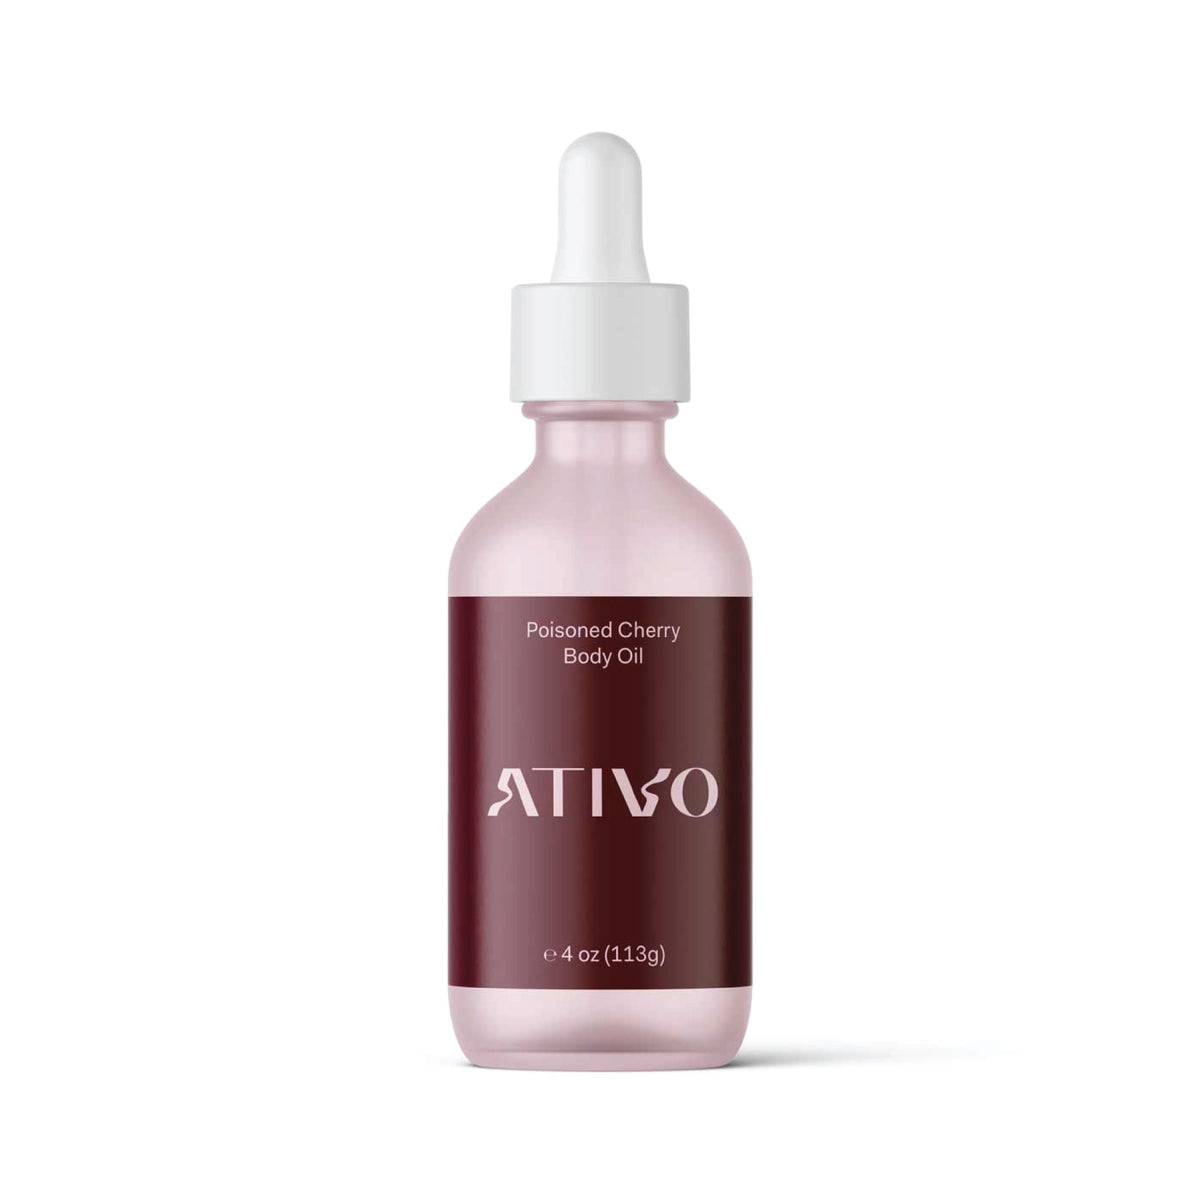 Poisoned Cherry Body Oil with Hyaluronic Acid